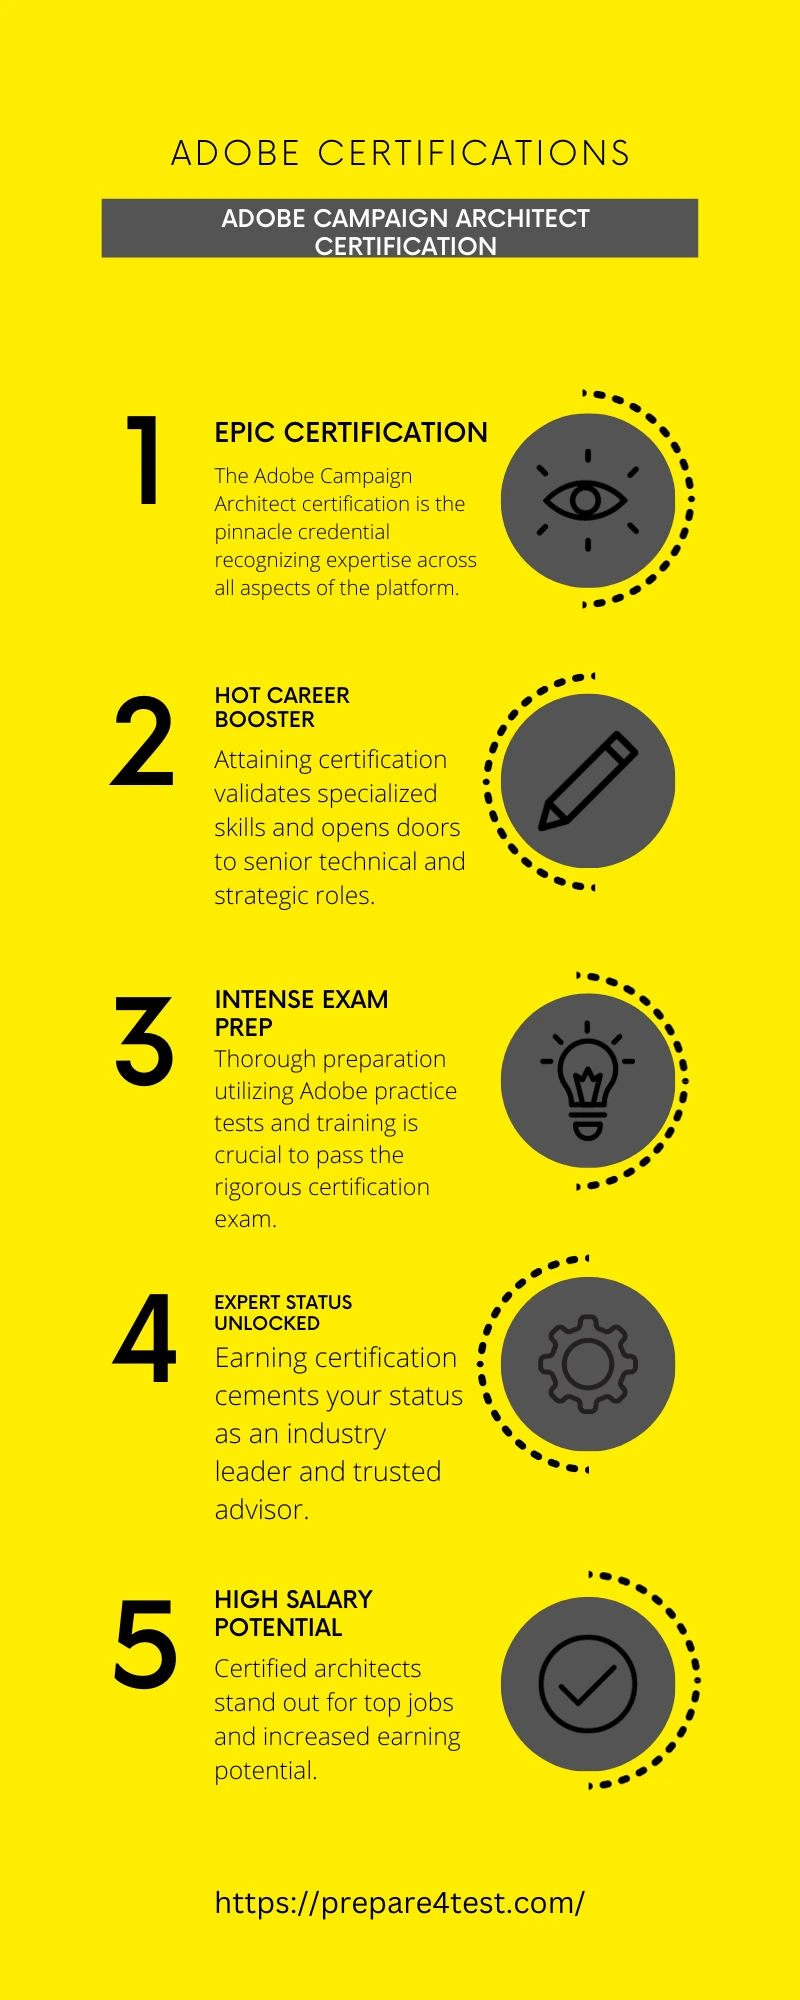 Adobe Campaign Architect Certification Infographic